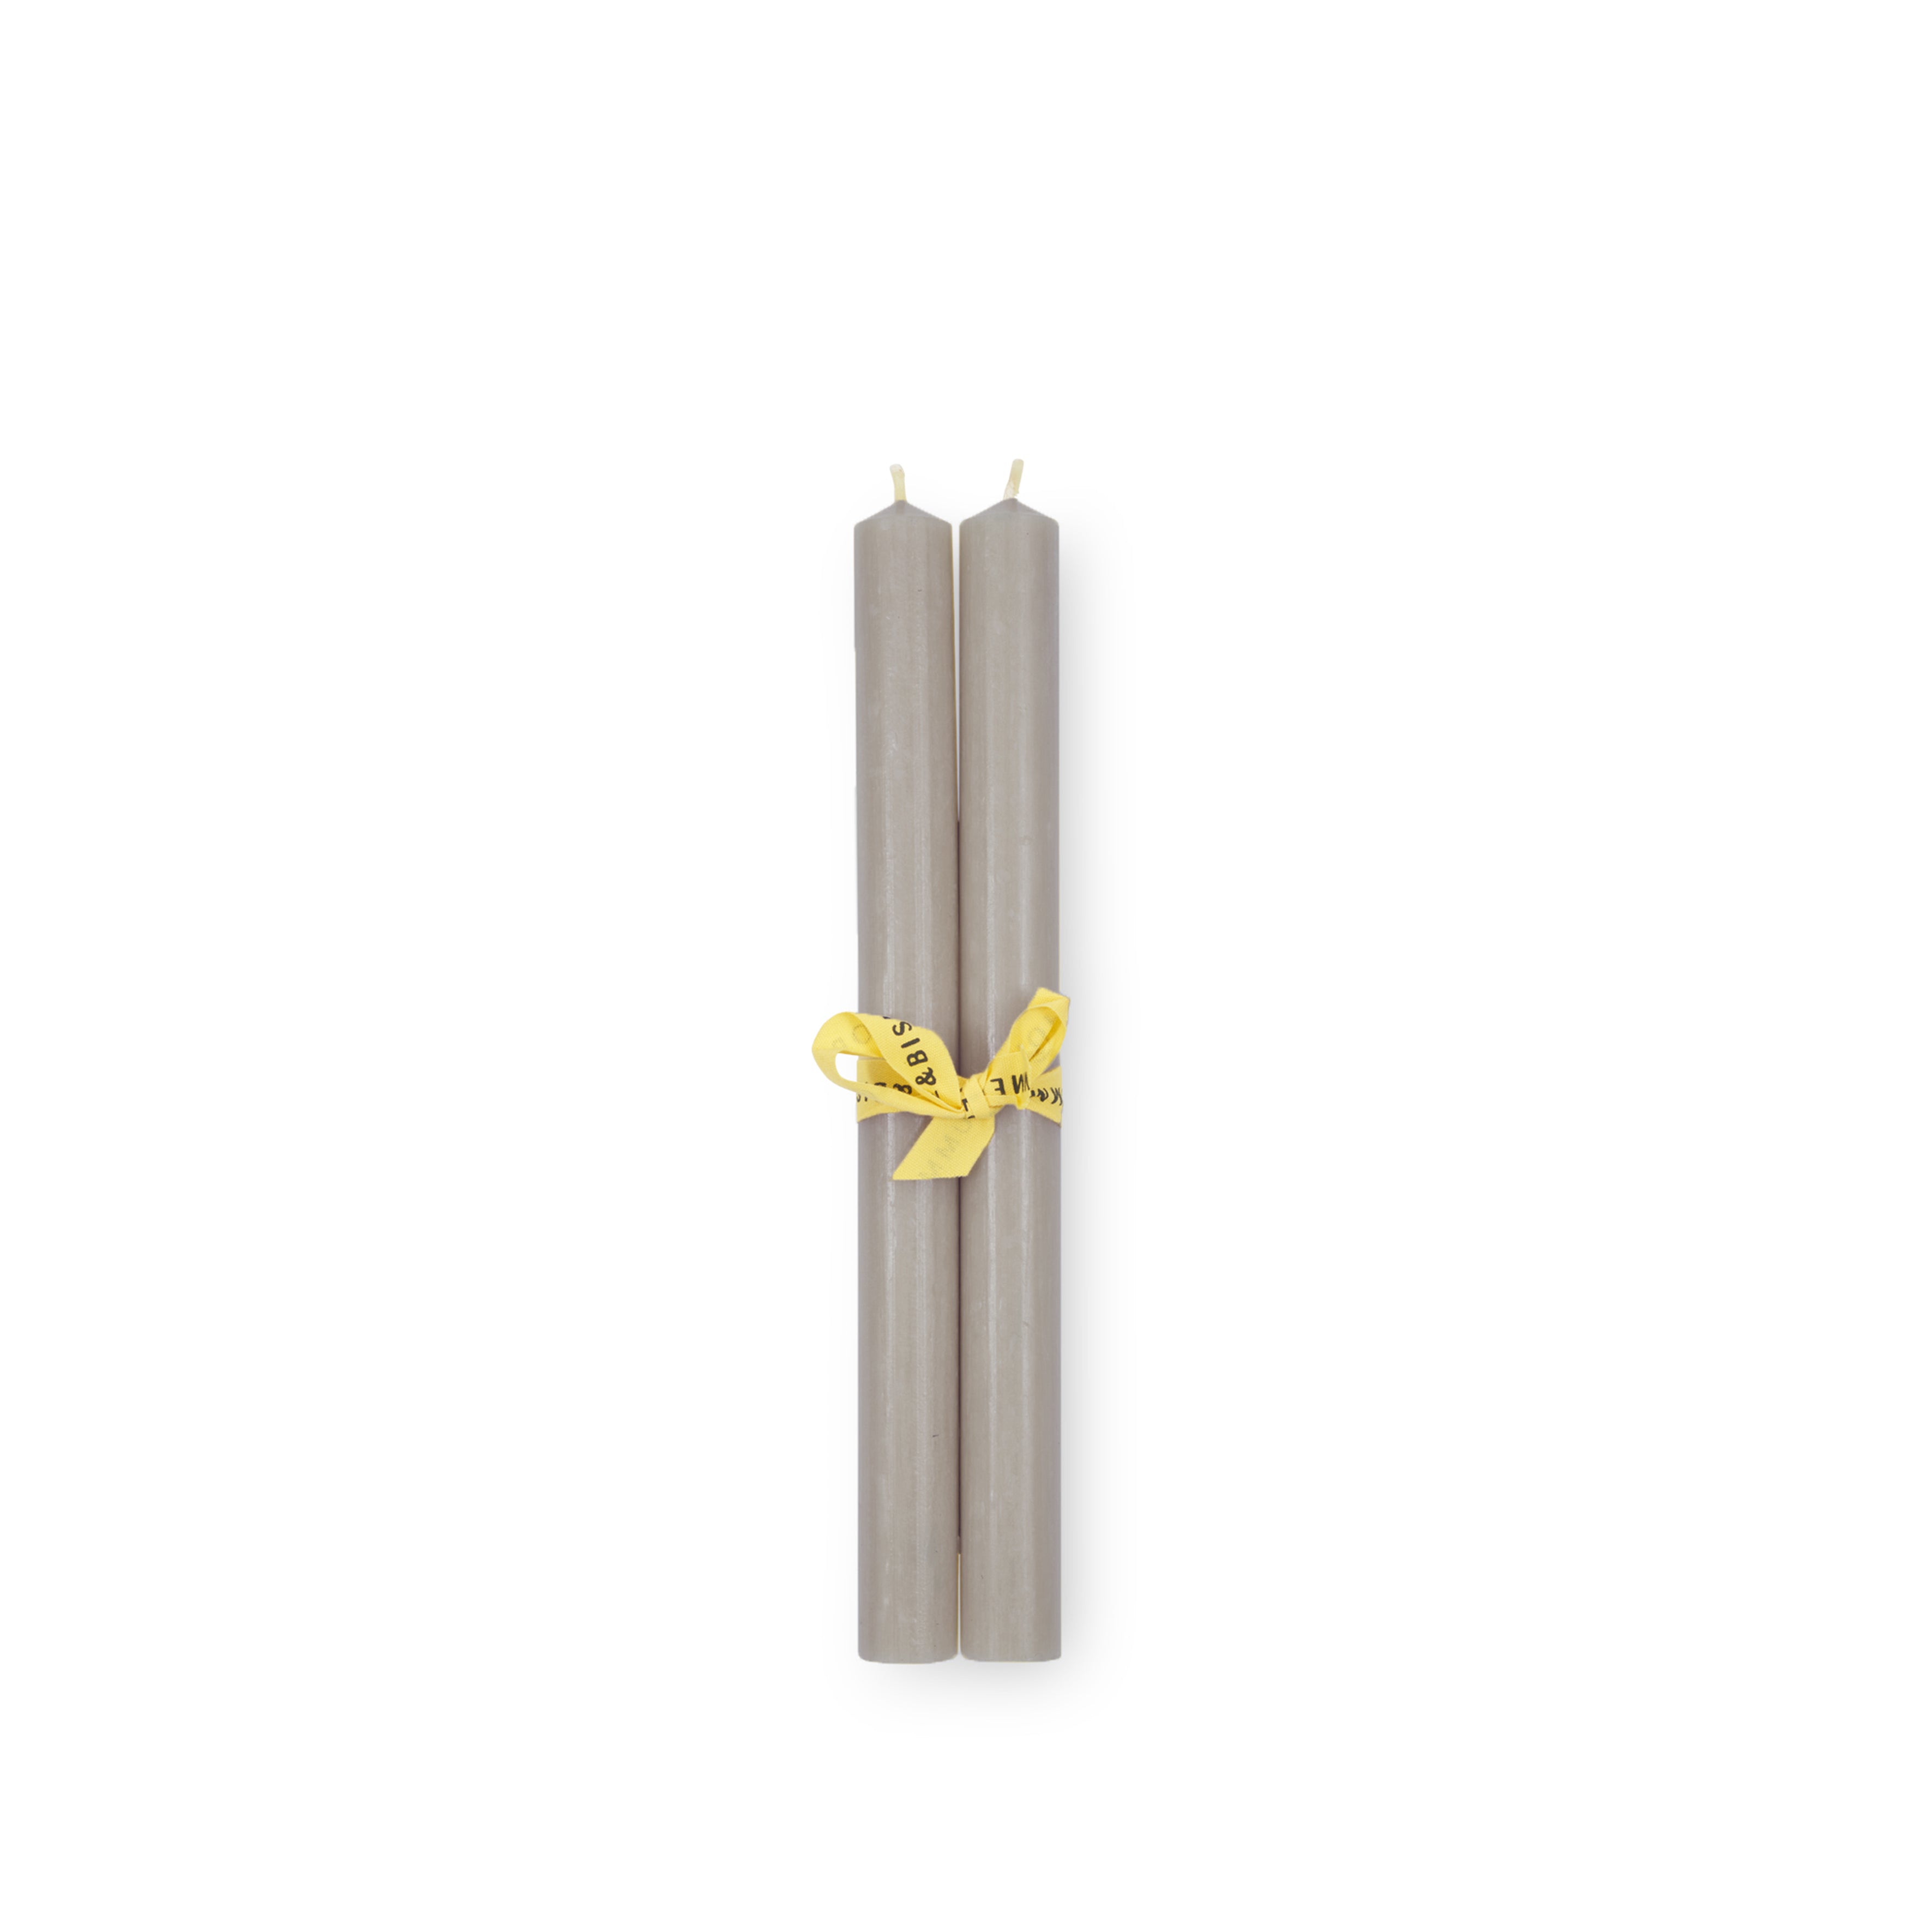 Pair of Coloured Church Candles in Mushroom Grey